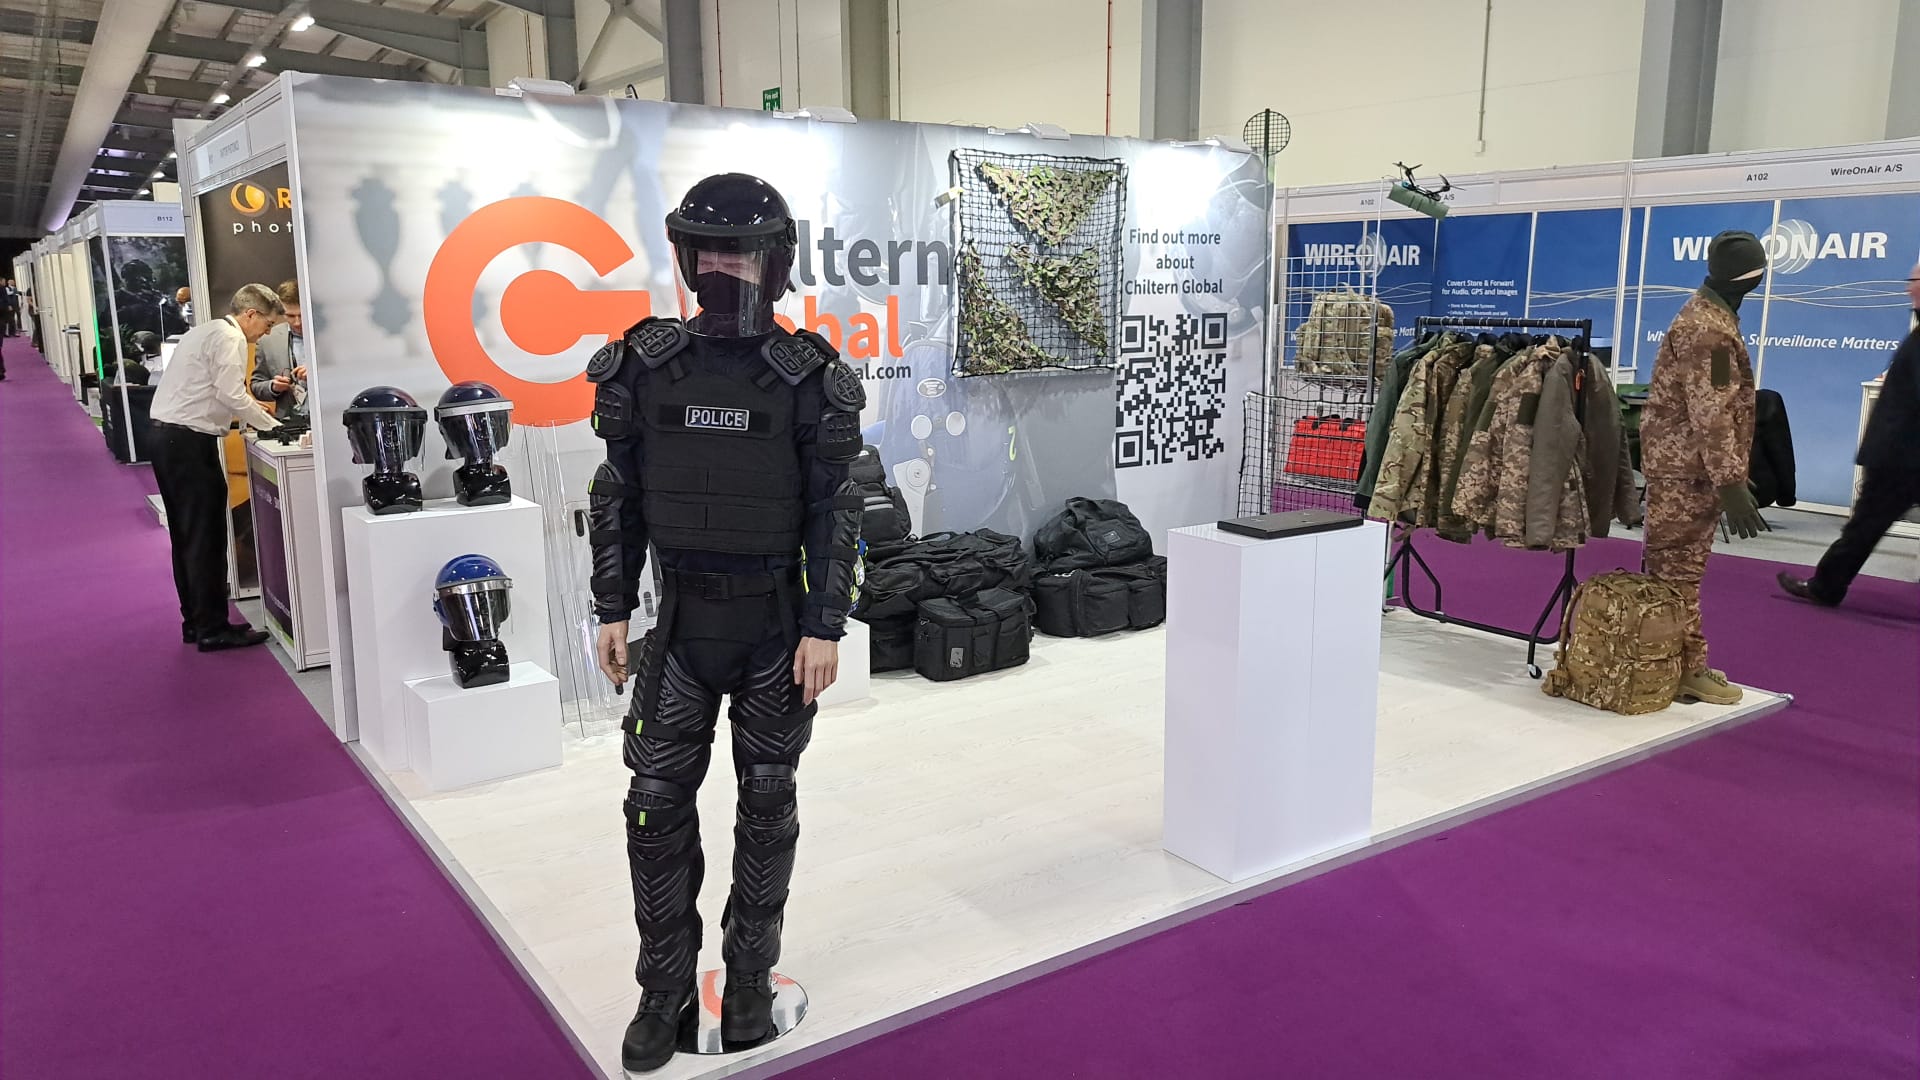 Chiltern Global at Security and Policing 2024